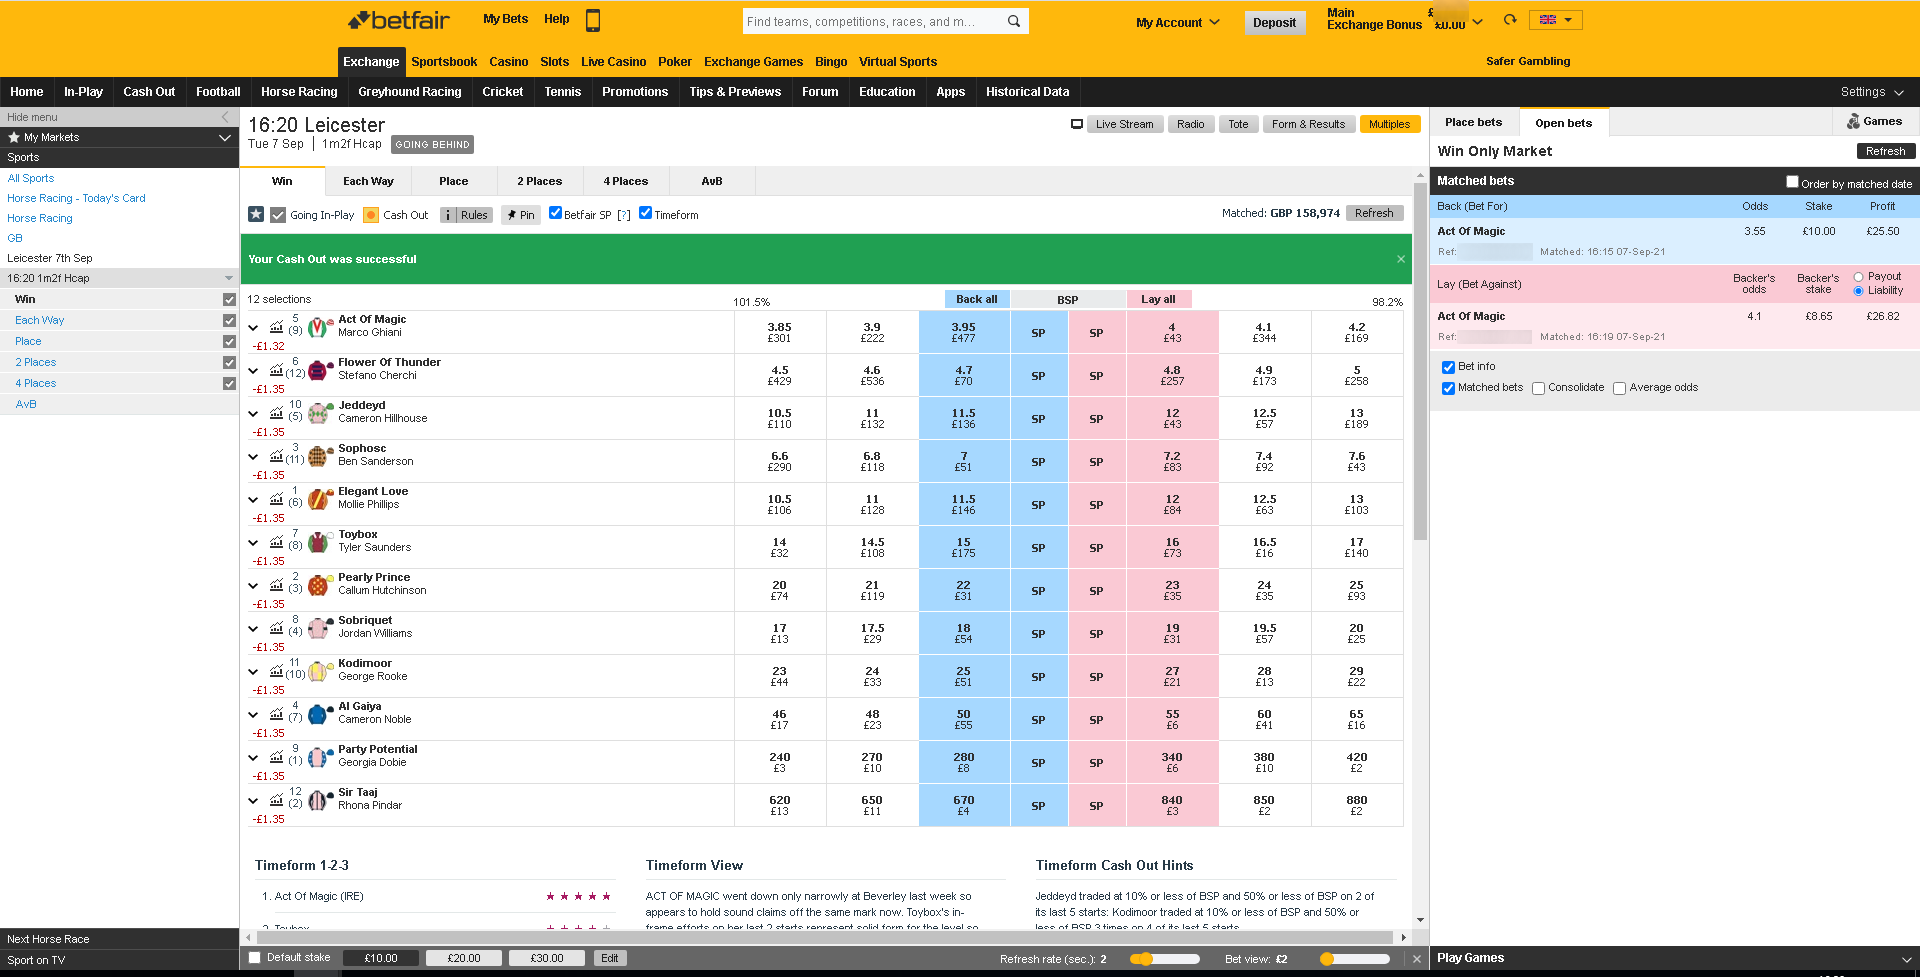 Betfair Exchange - A back bet, with a lay bet - Losing trade.